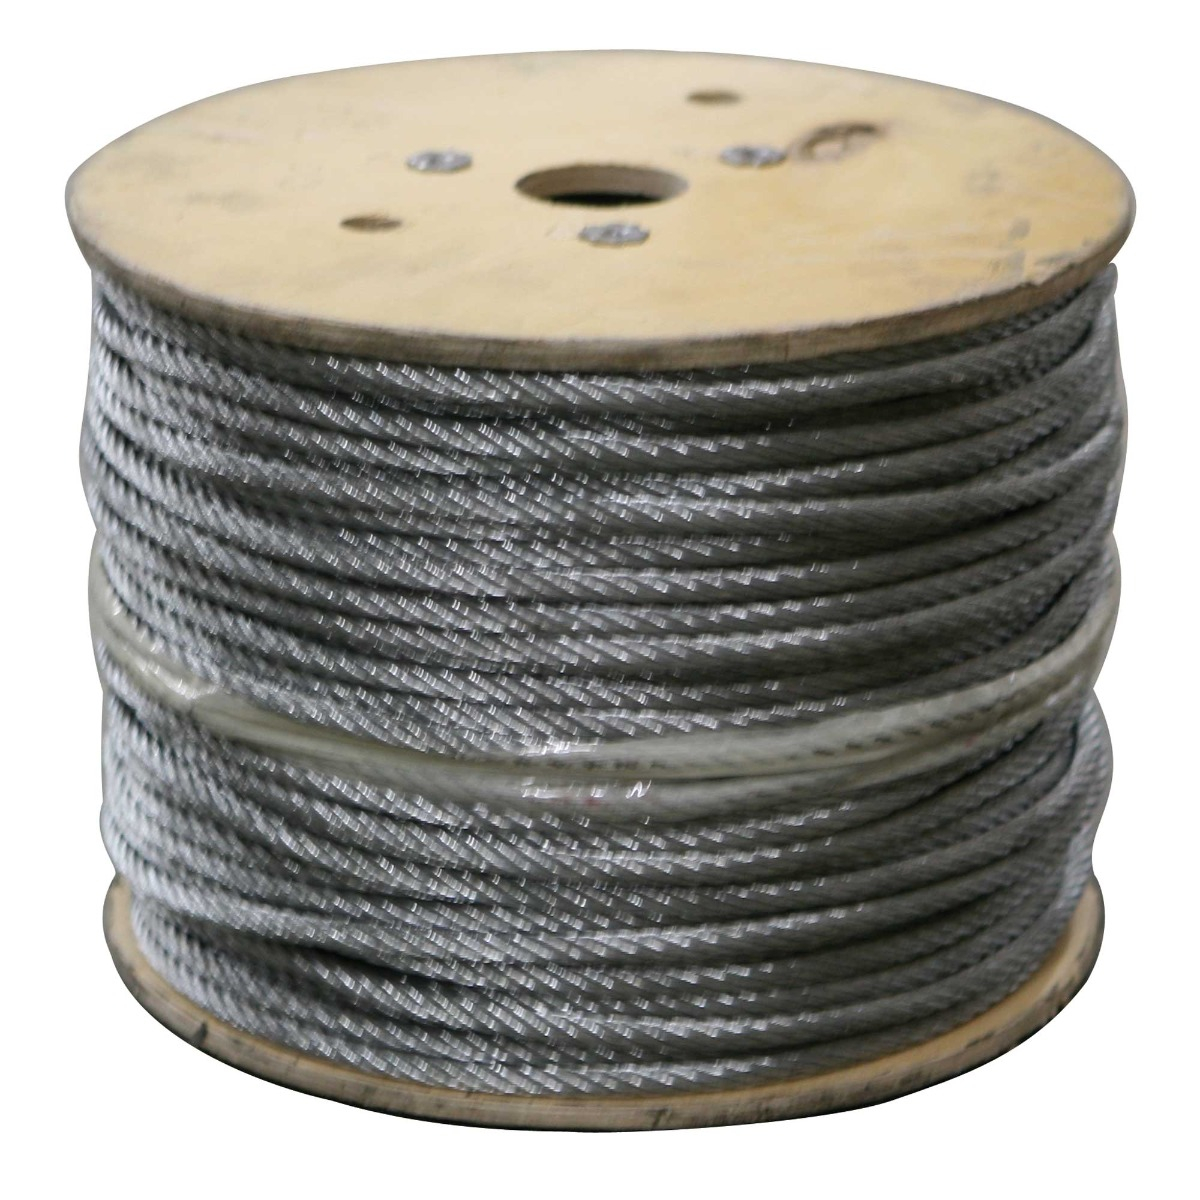 1/16 Inch Wire Rope Kit,330 Feet Stainless Steel 304 Wire Cable with 50 PCS 